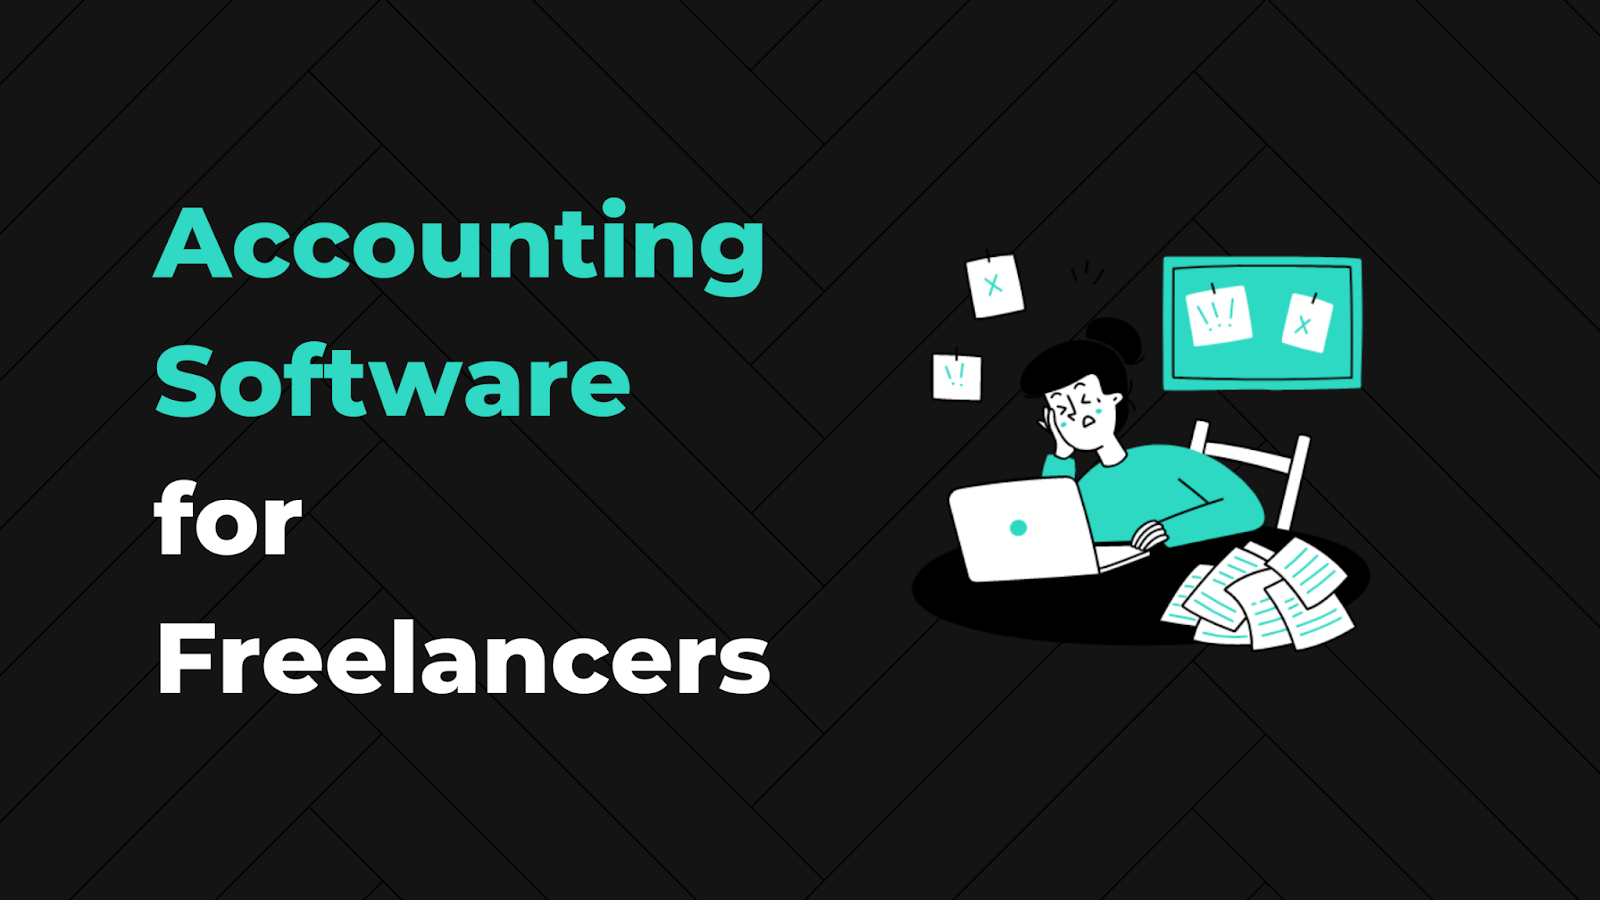 What are the 4 best accounting programs for freelancers in 2022?